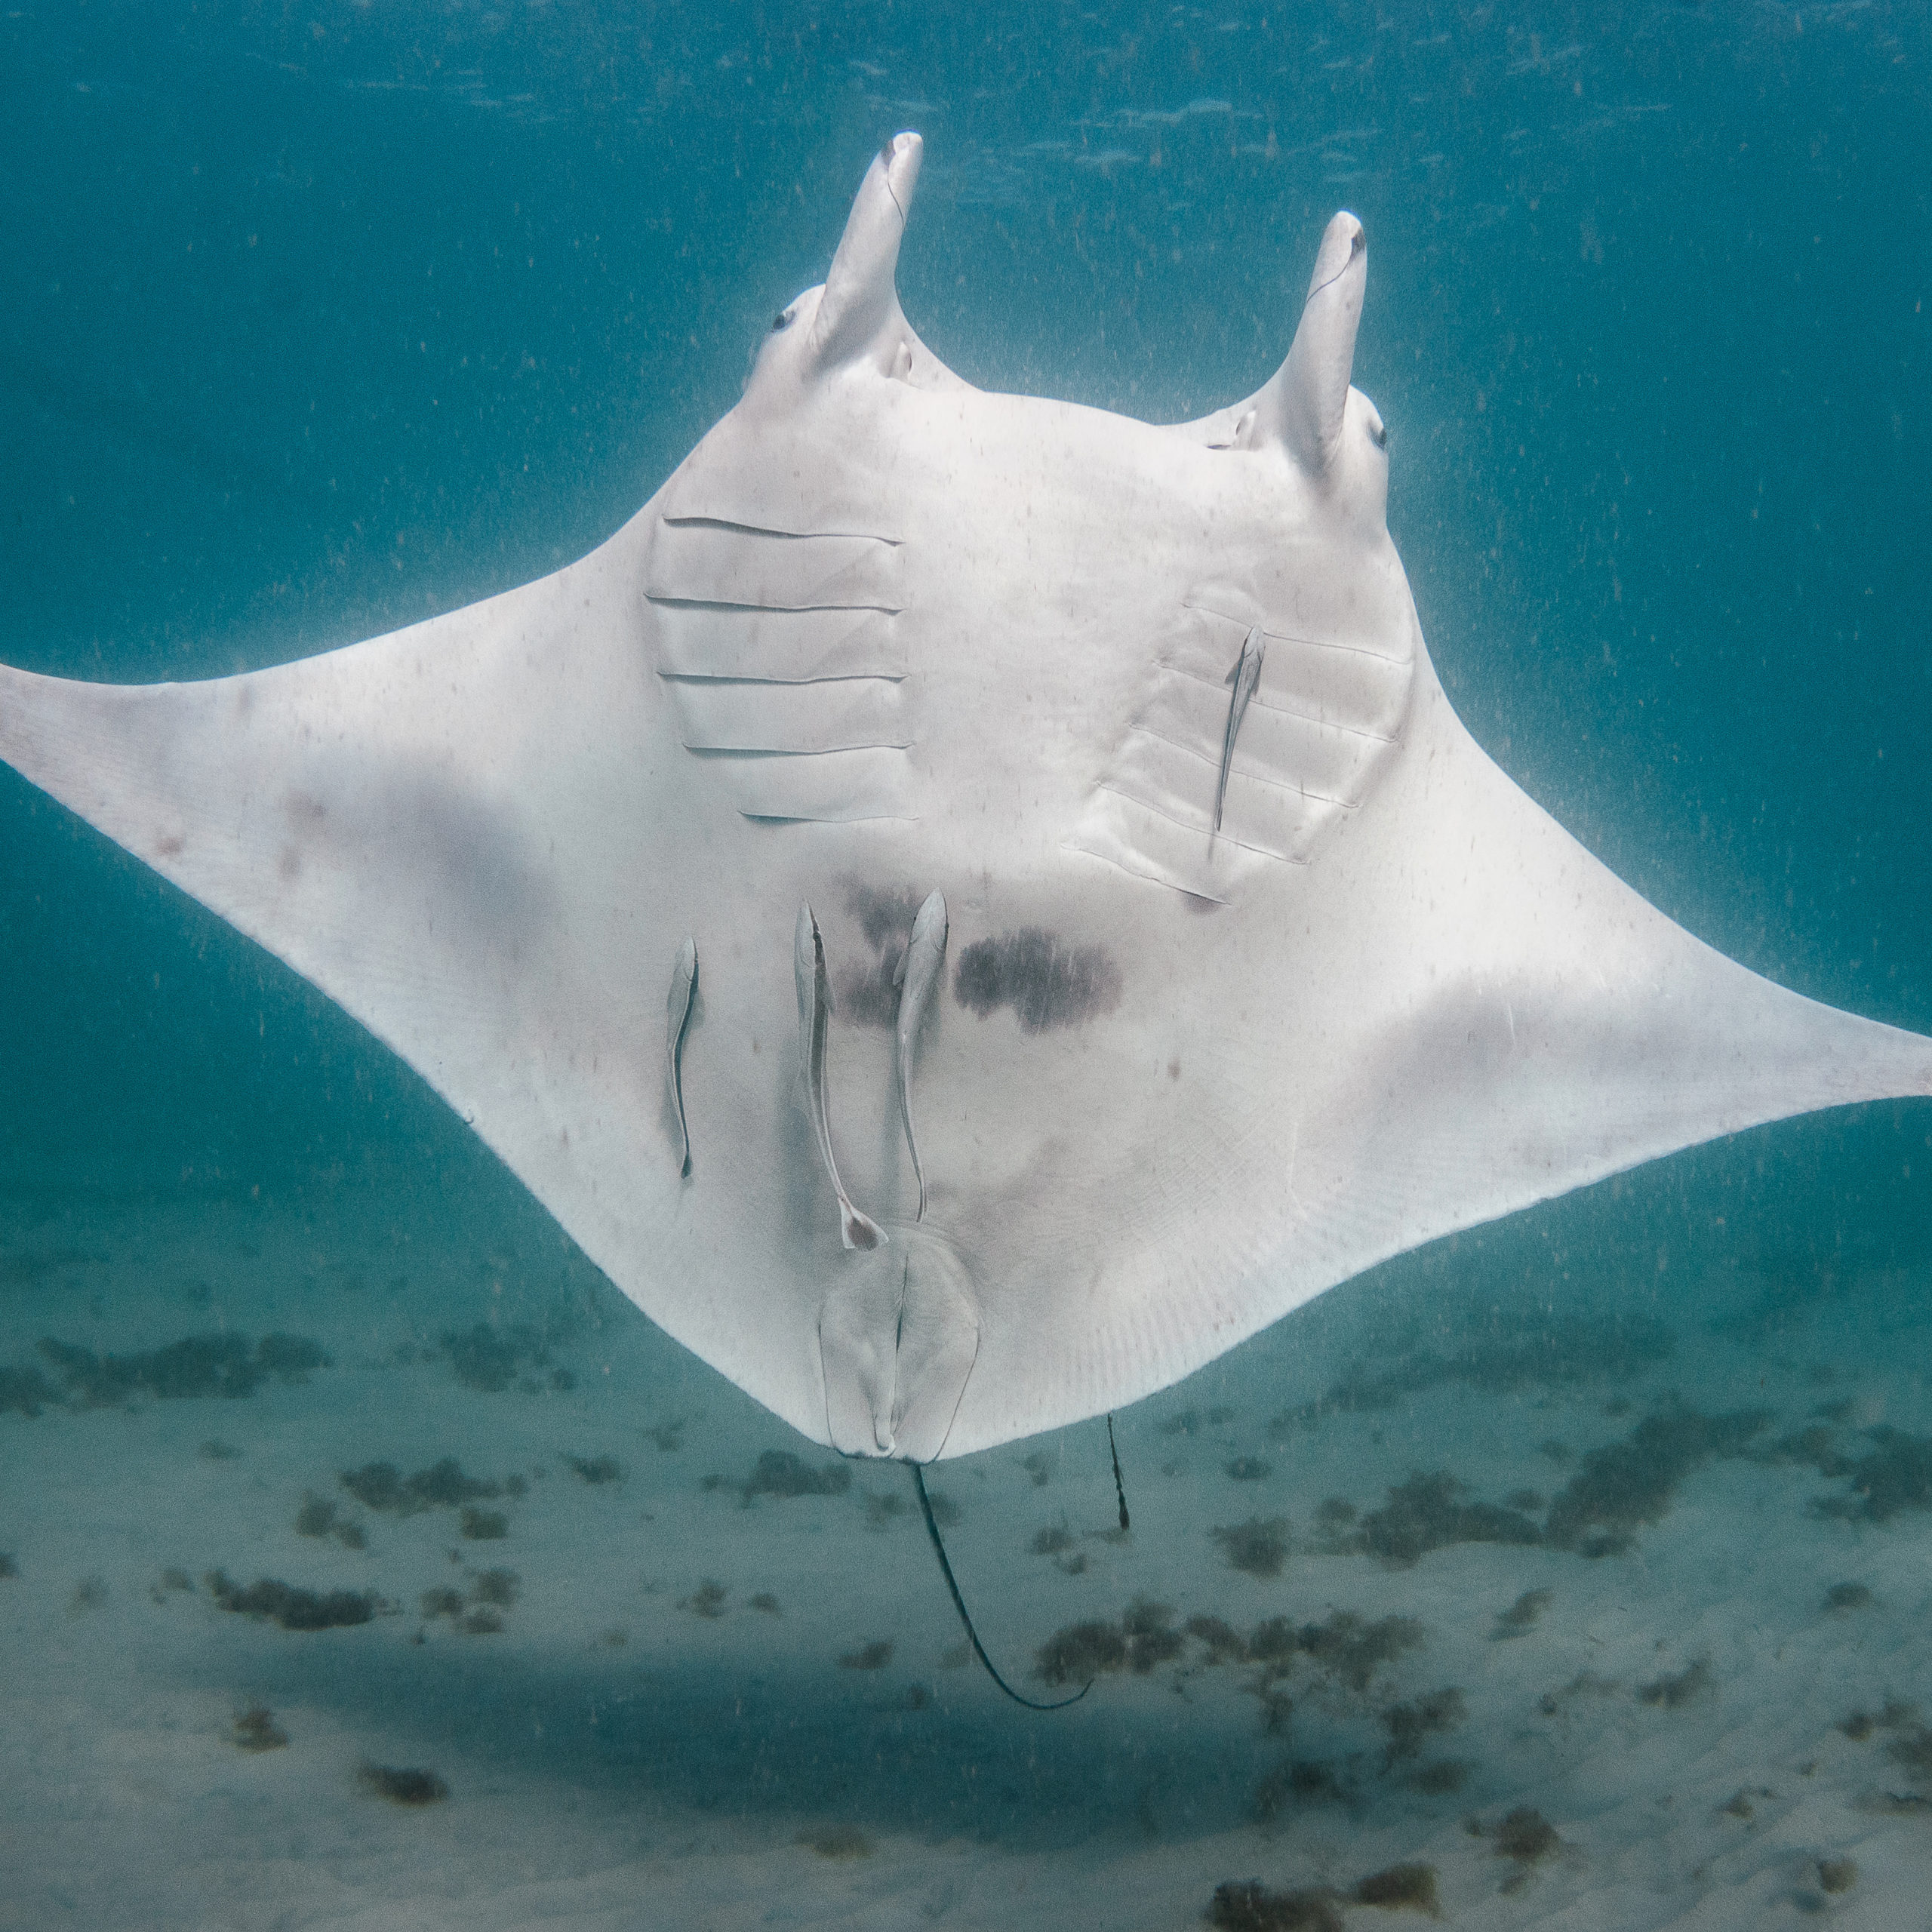 Skye is one of the friendliest mantas we have here, and also the subject of a 3D model! PC: Bryant Turffs